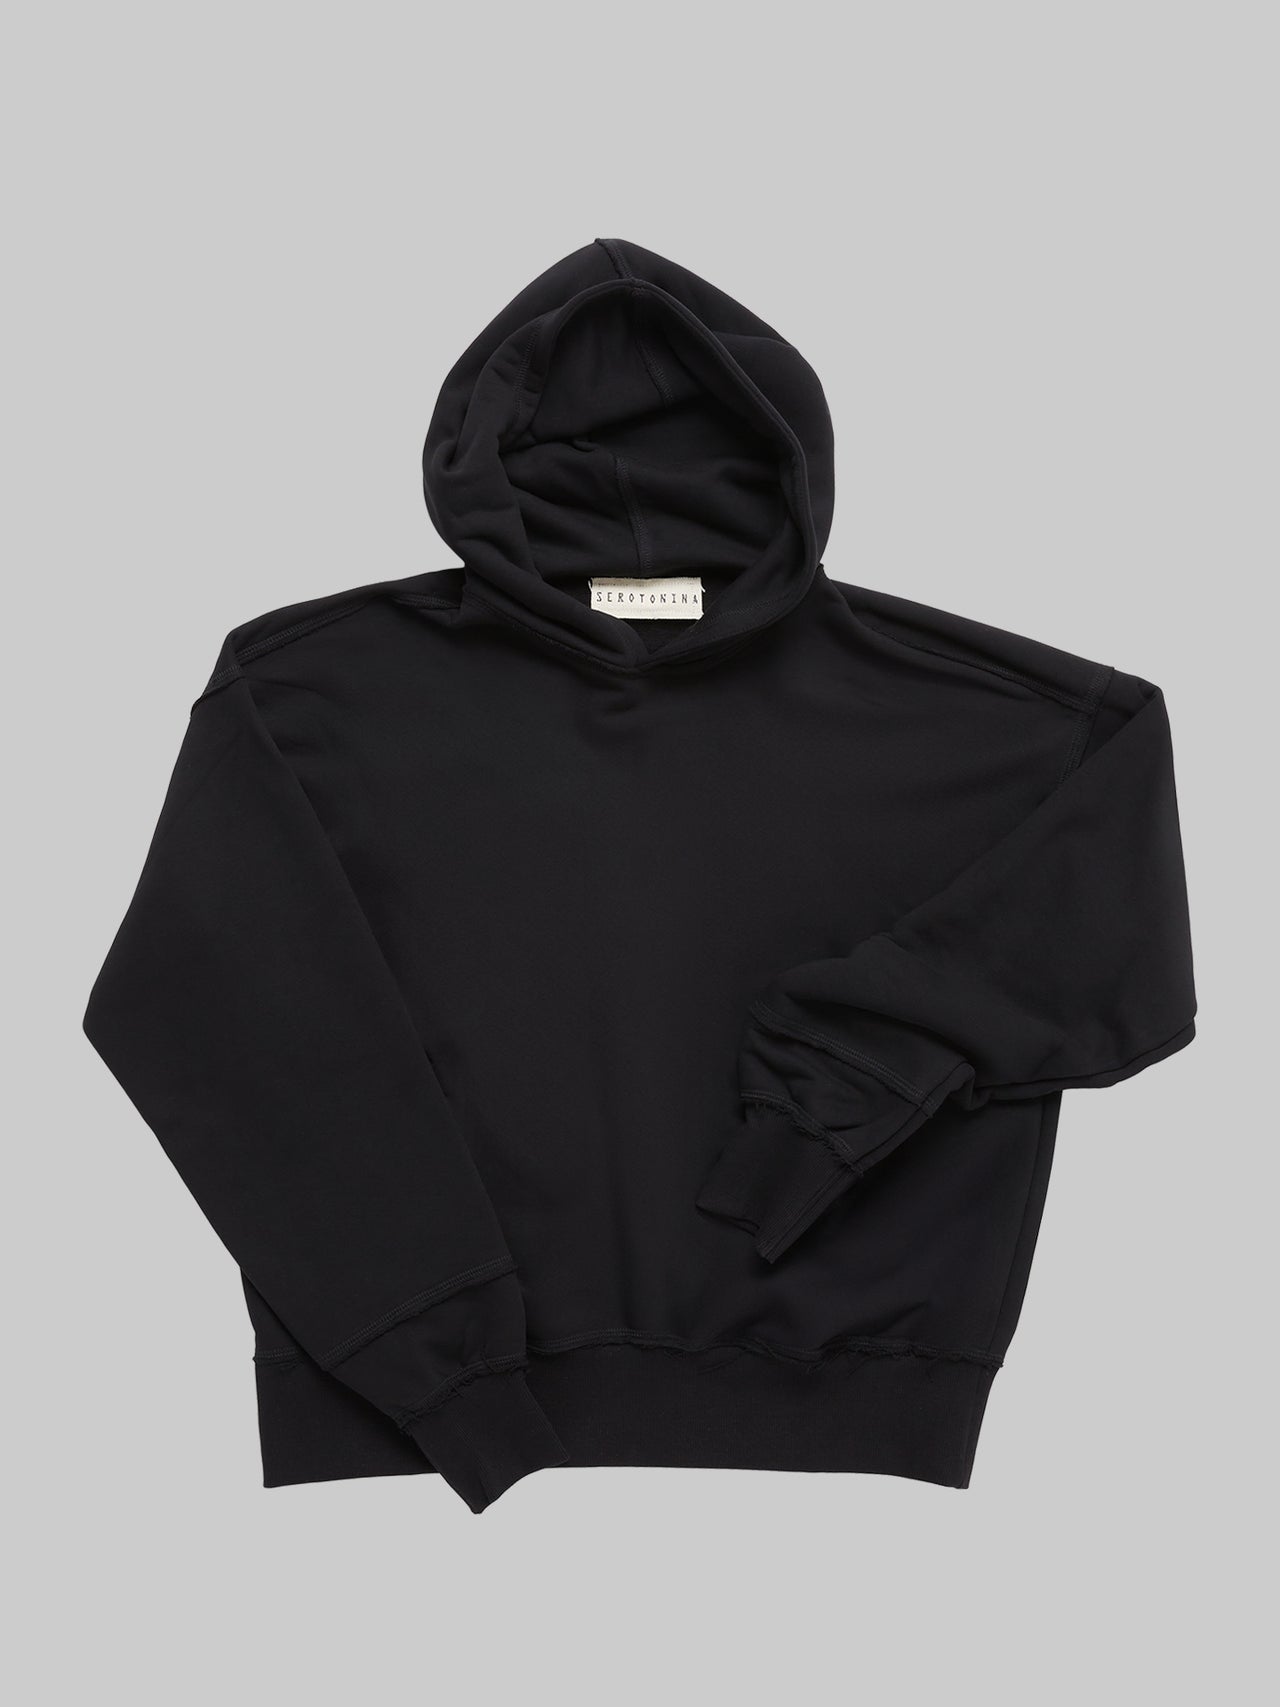 SOUL'S REFLECTION HOODIE